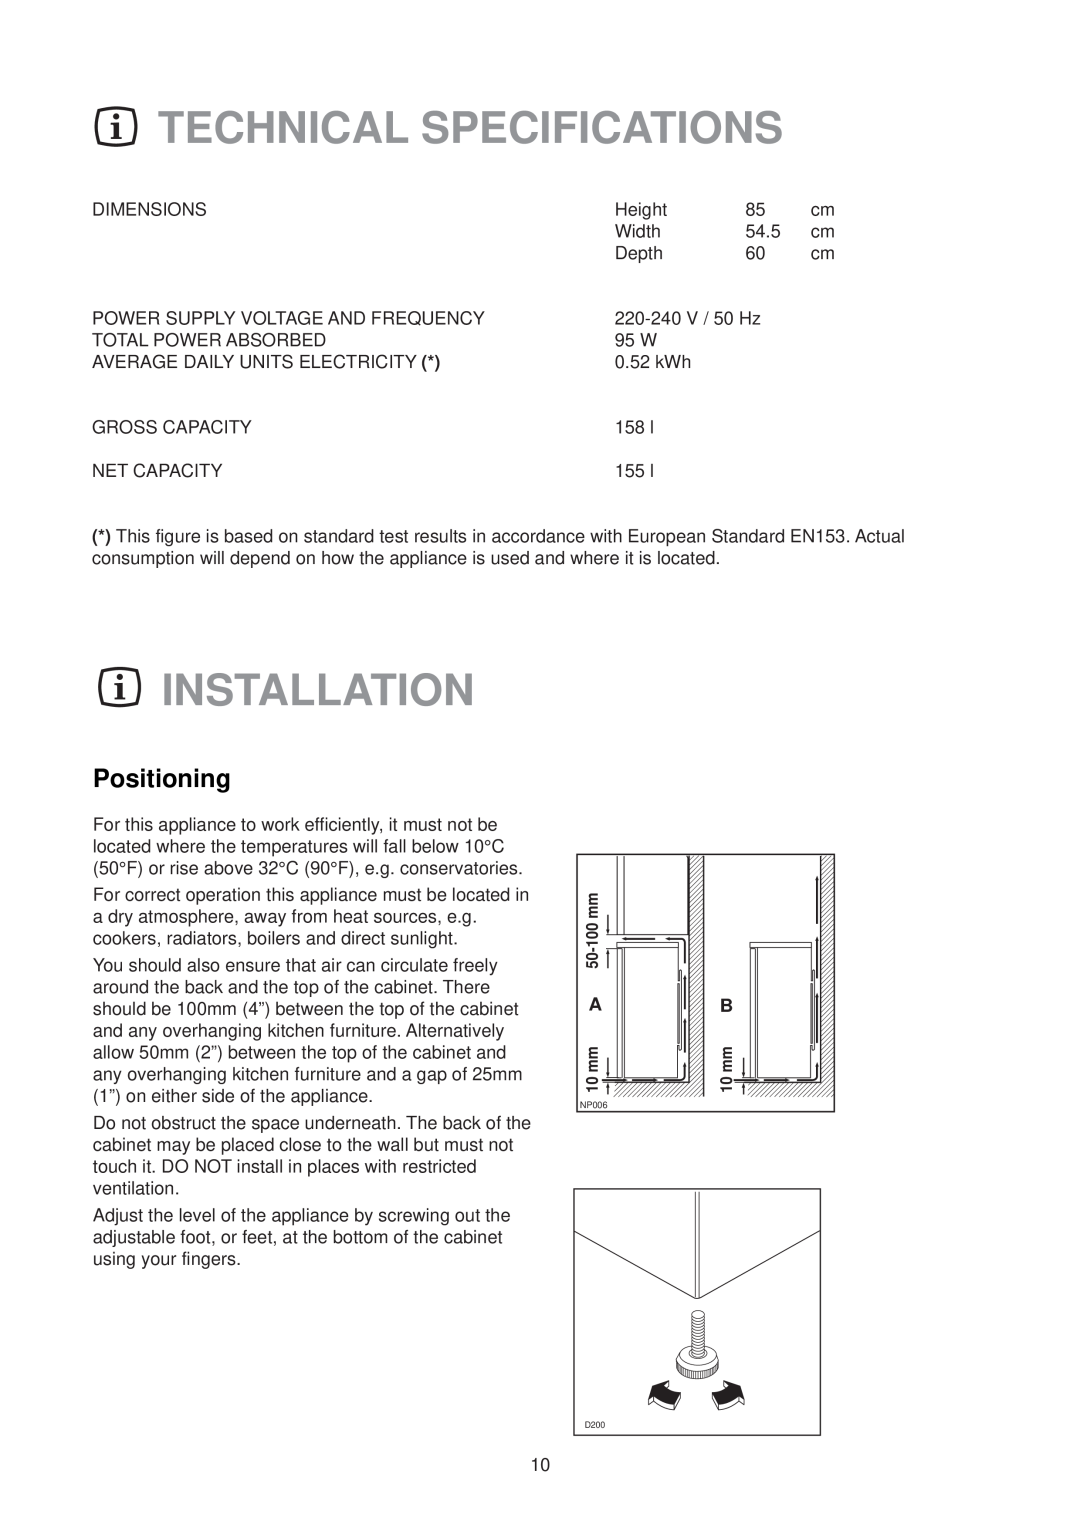 Electrolux ER 1626 T manual Technical Specifications, Installation, Positioning 